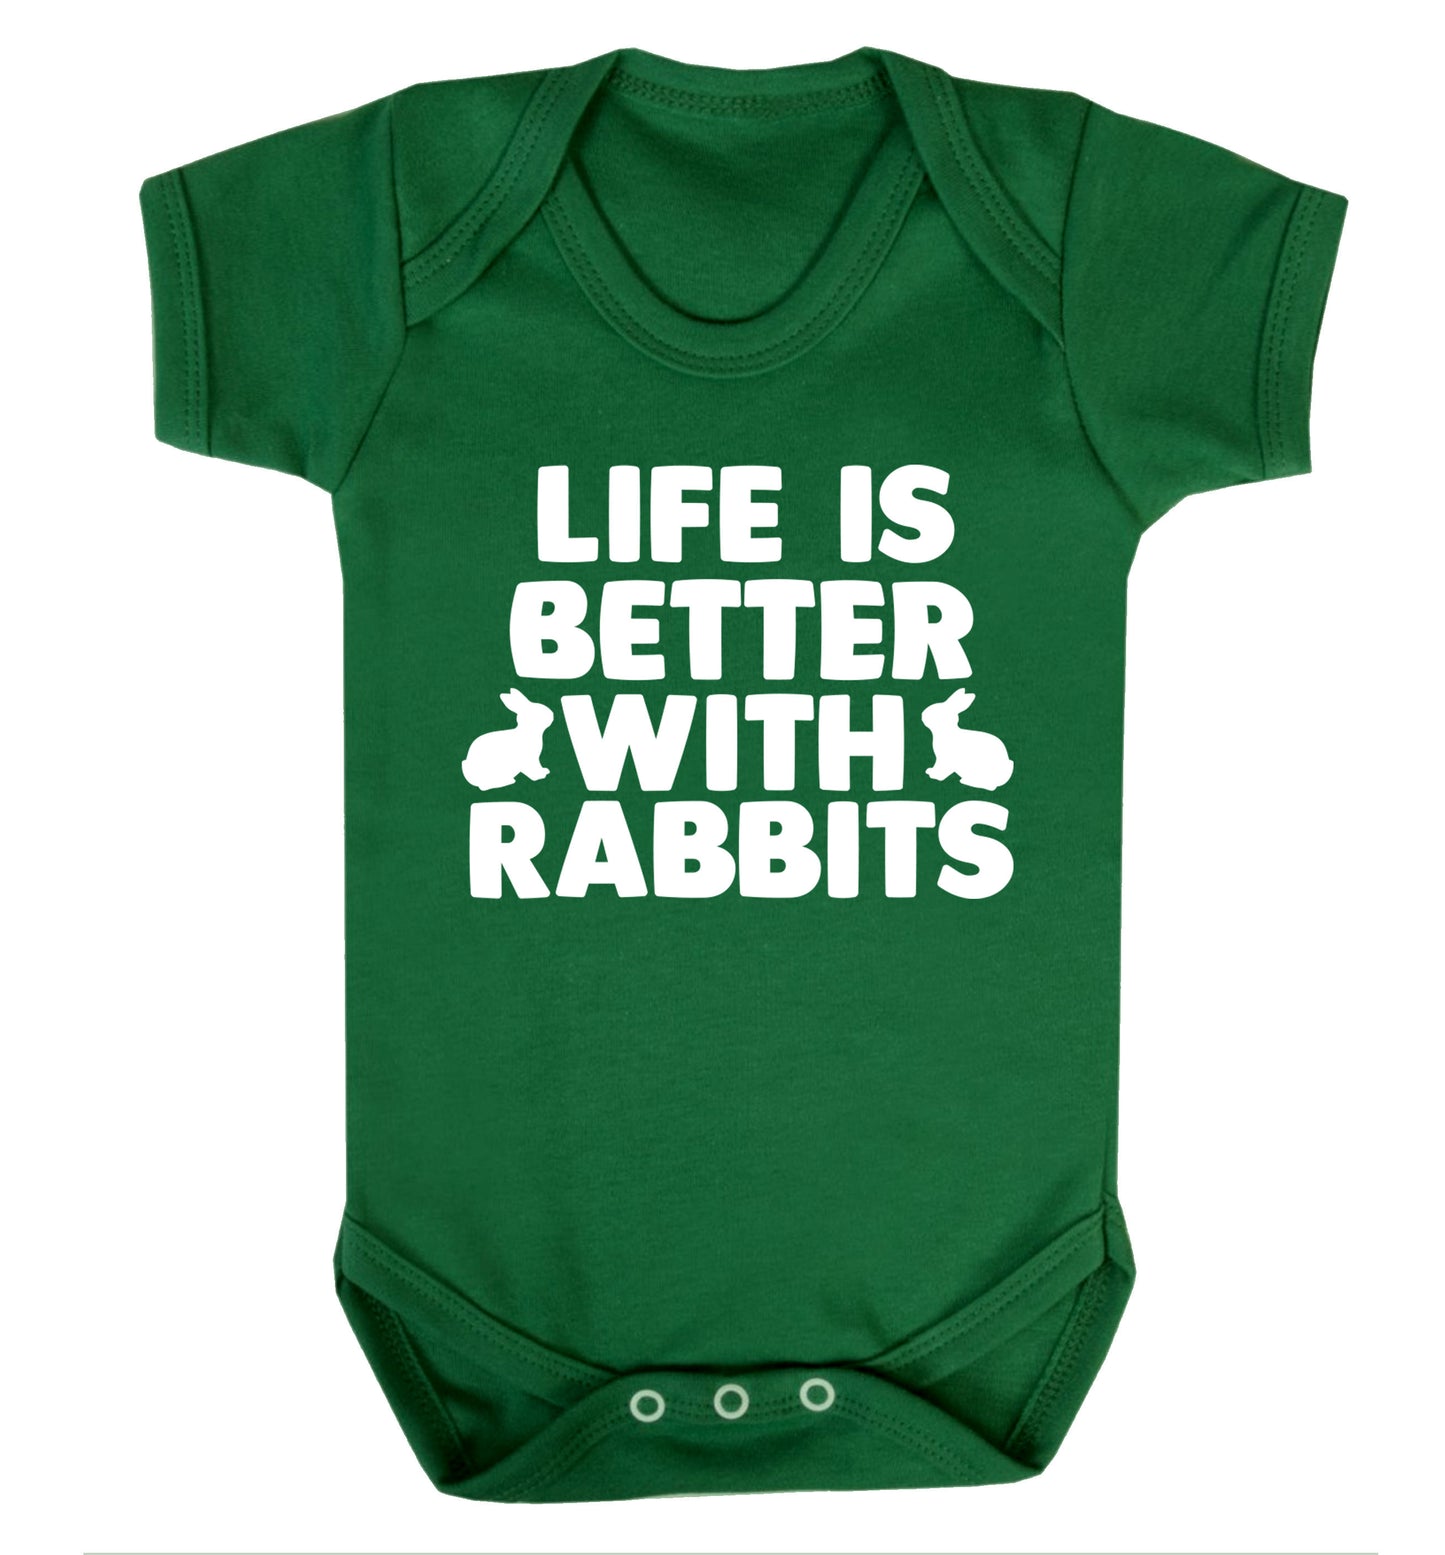 Life is better with rabbits Baby Vest green 18-24 months